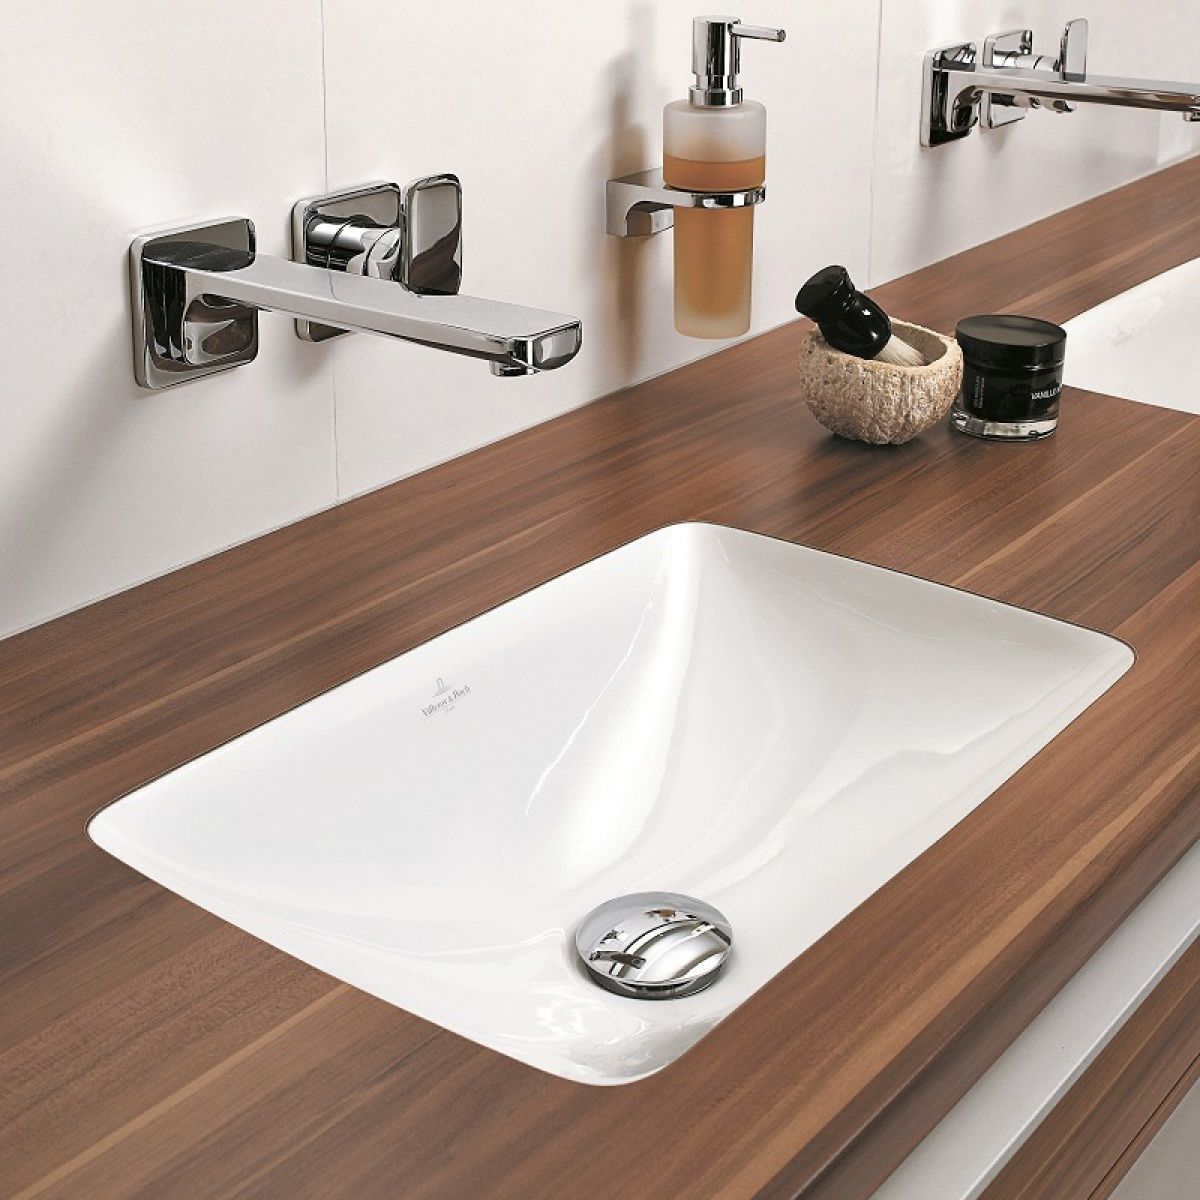 image example of an inset basin